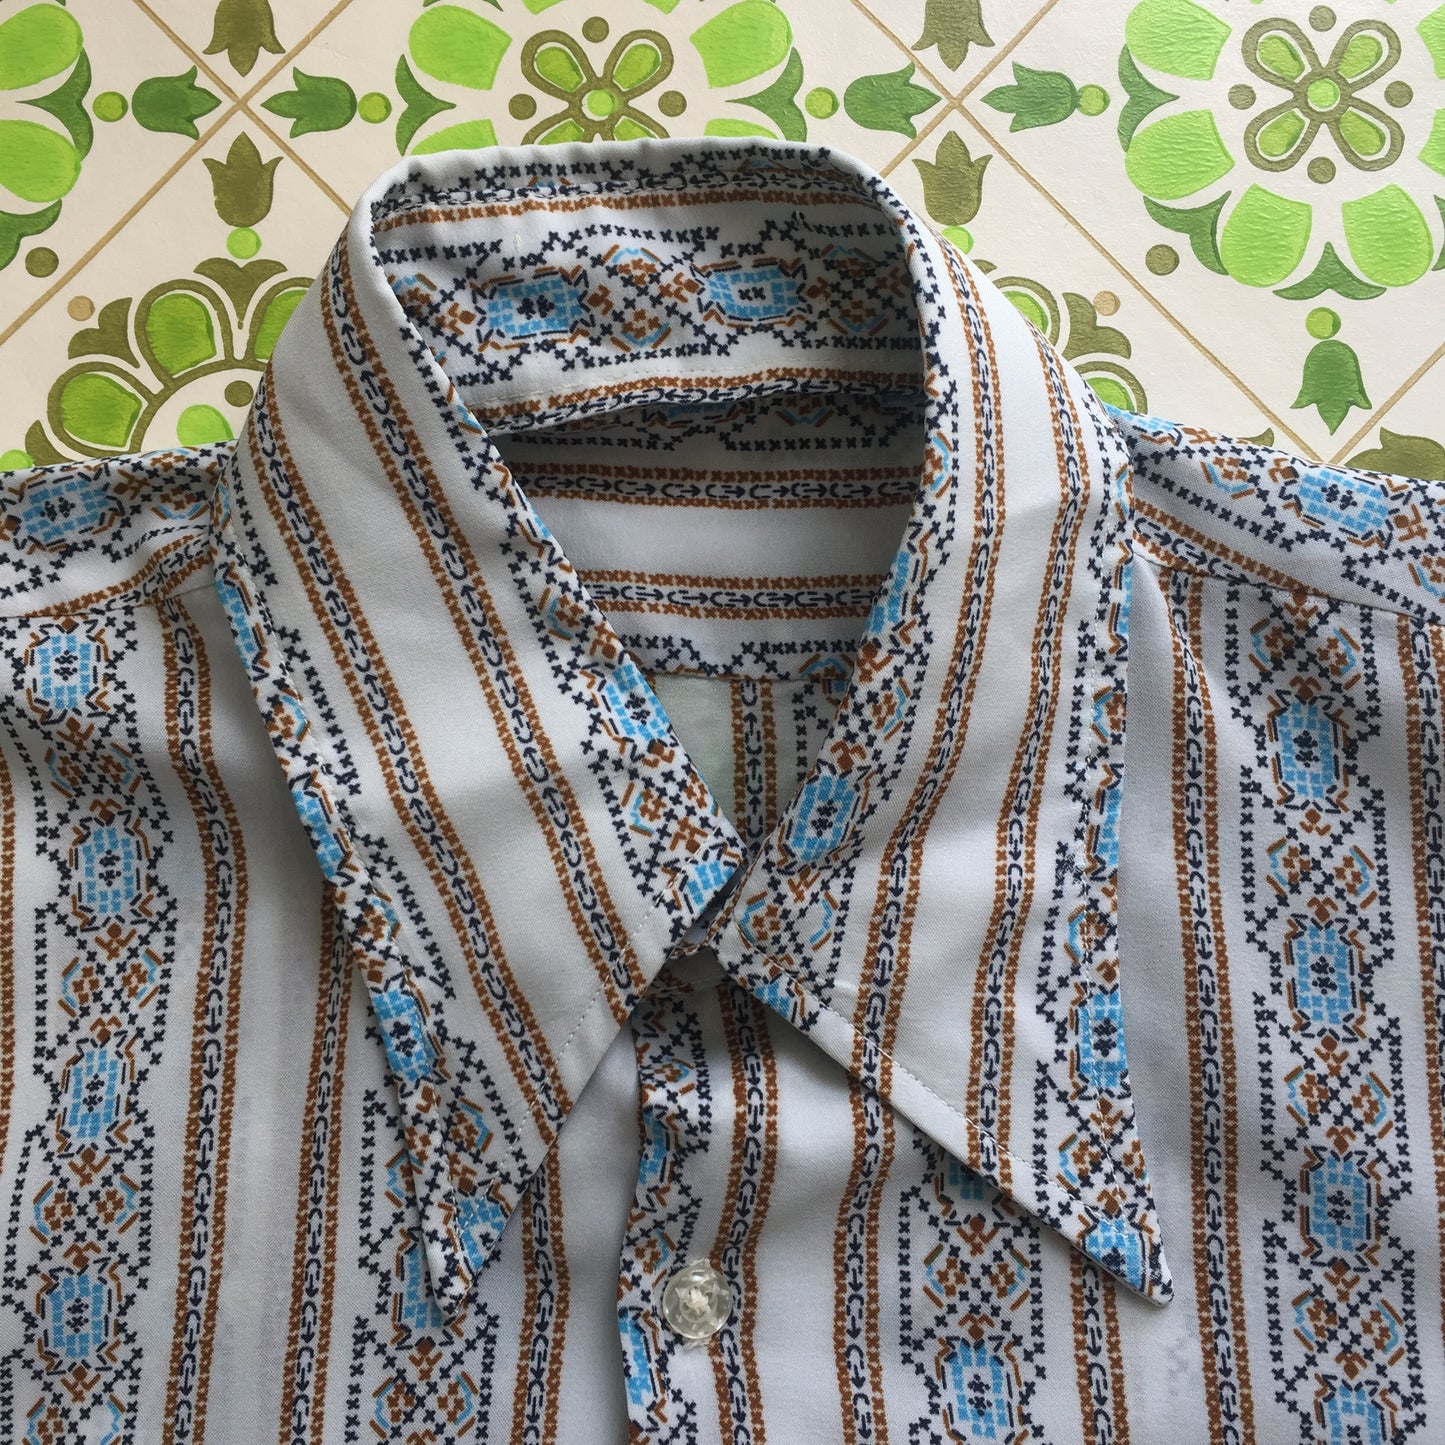 Awesome MENS Vintage Shirt Casual Top 70's Fashion